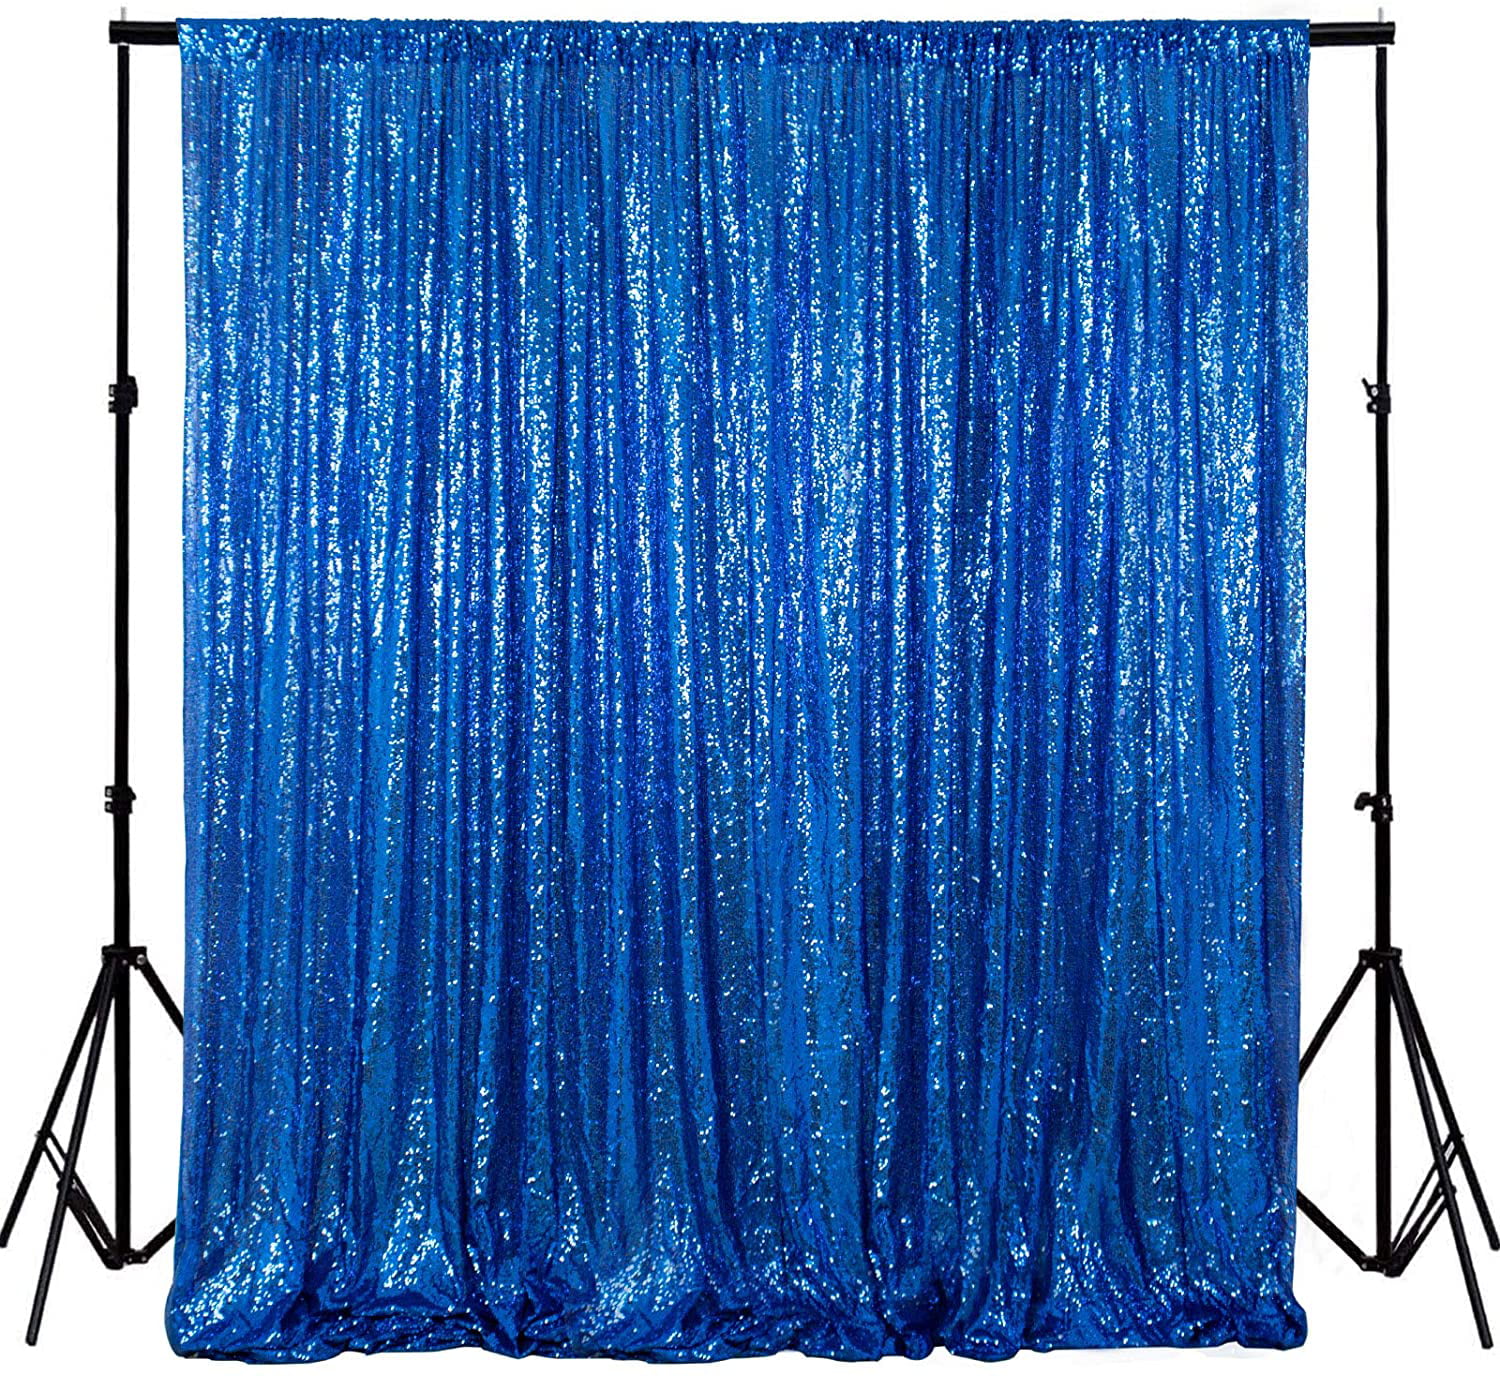 4FTX6FT Sequin Curtain Wedding Photobooth Backdrop Party Photography Background